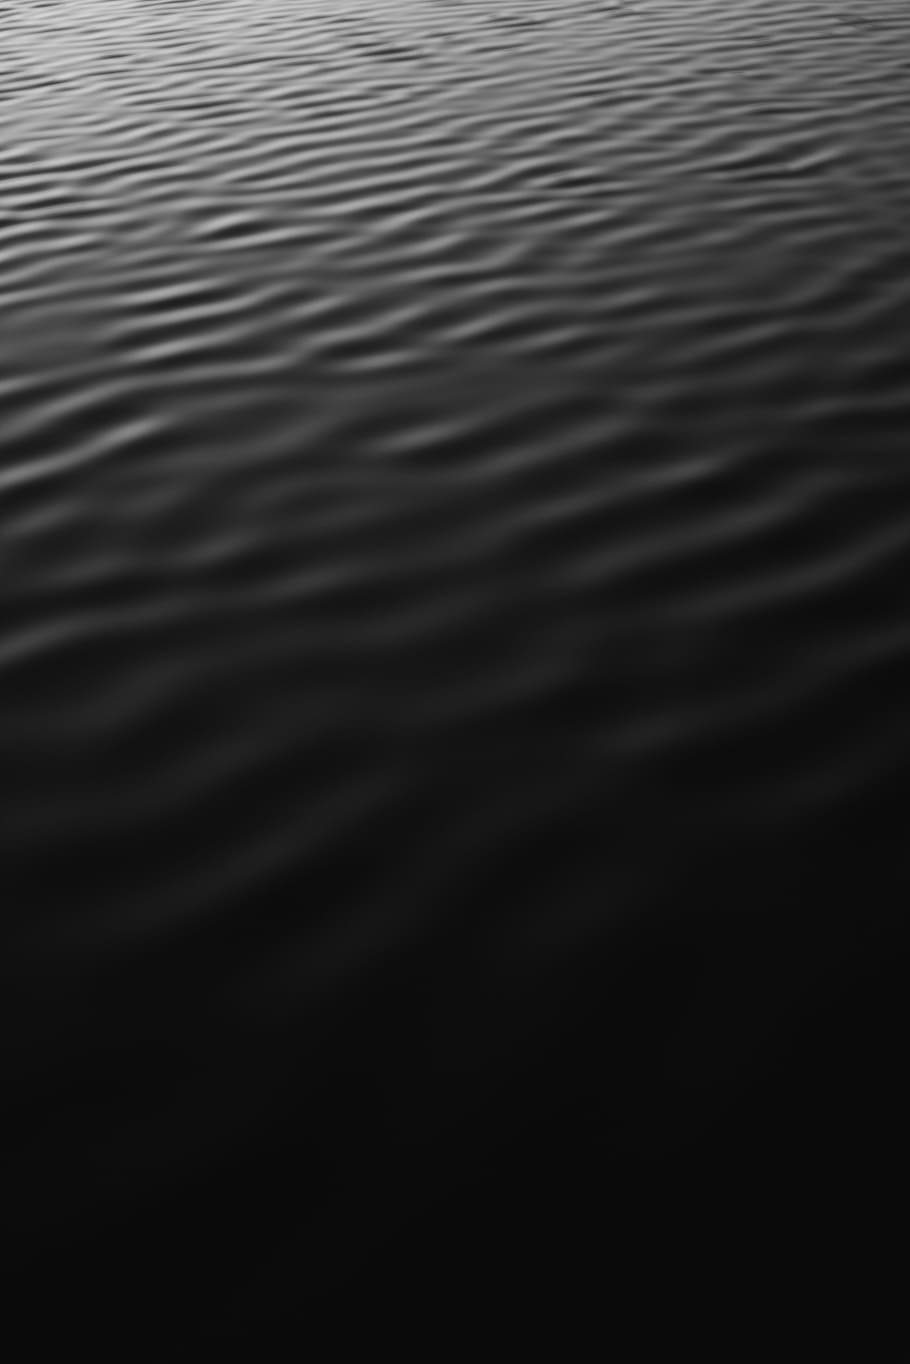 ripple, water, black and white, texture, surface, outside, wallpaper, HD wallpaper